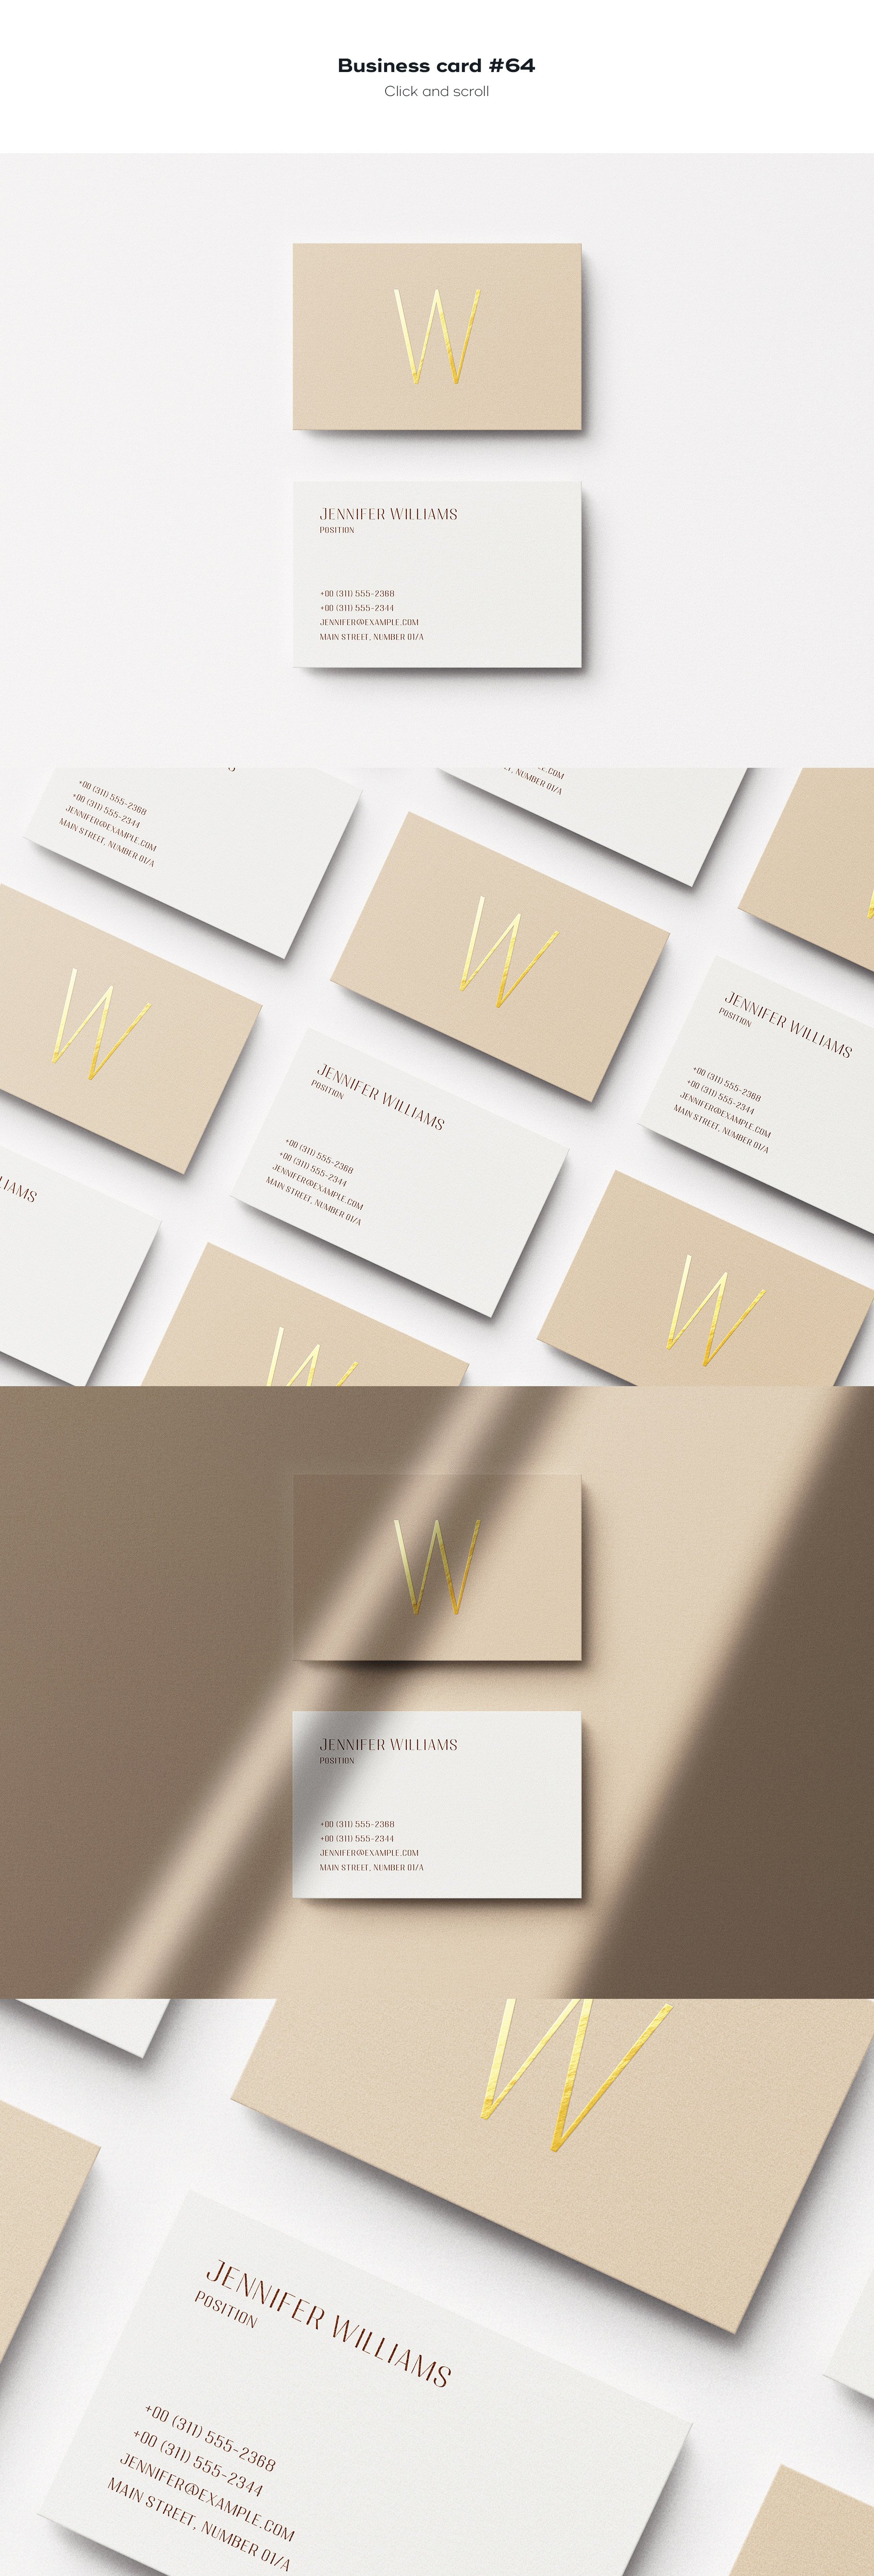 business card 64 477